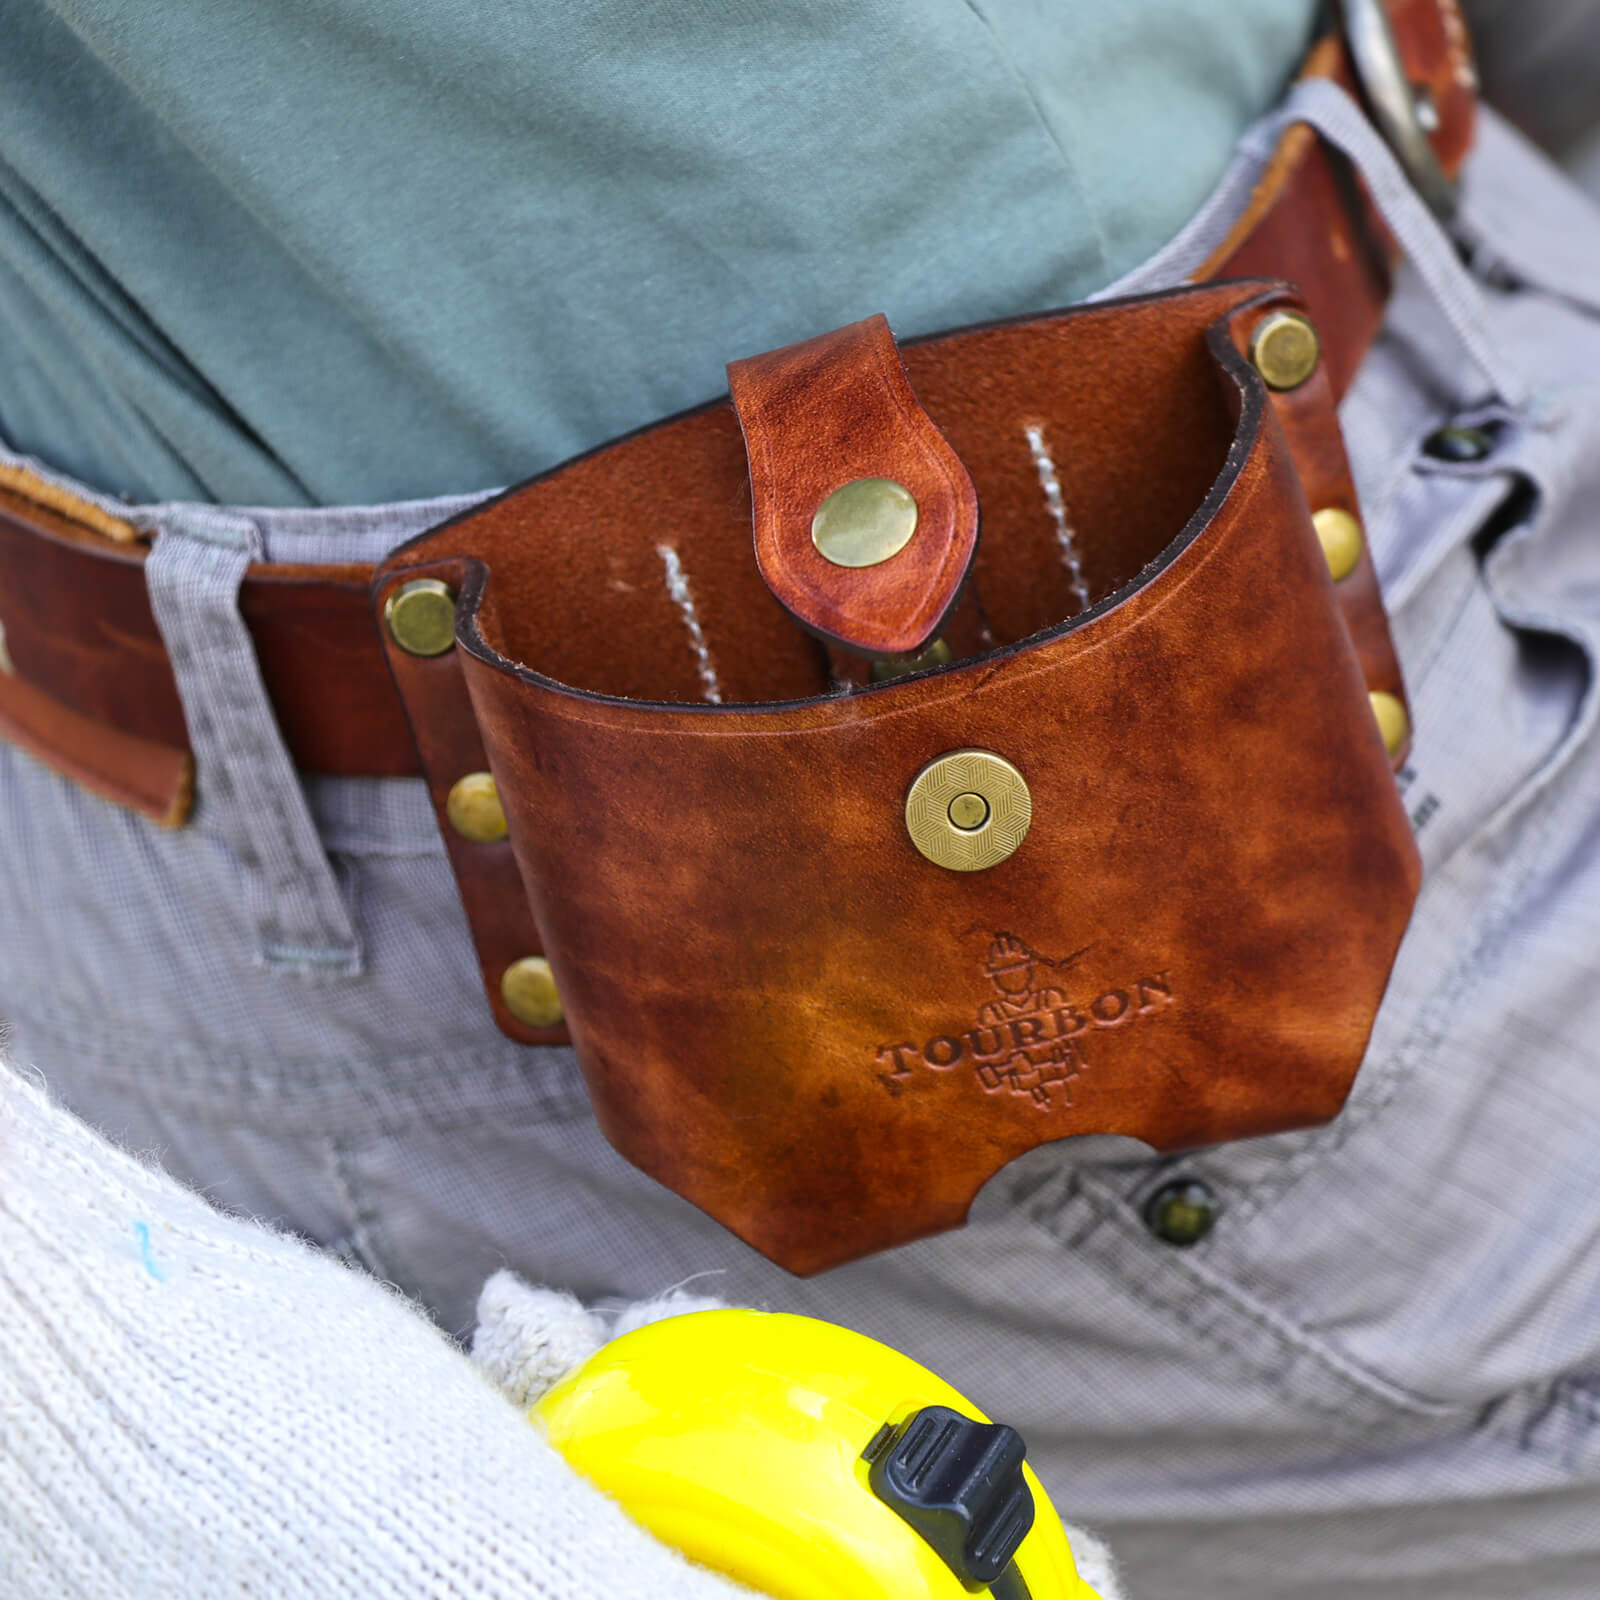  TOURBON Tool Belt Holster Screw Work Pouch with Tape Measure  Clip : Tools & Home Improvement